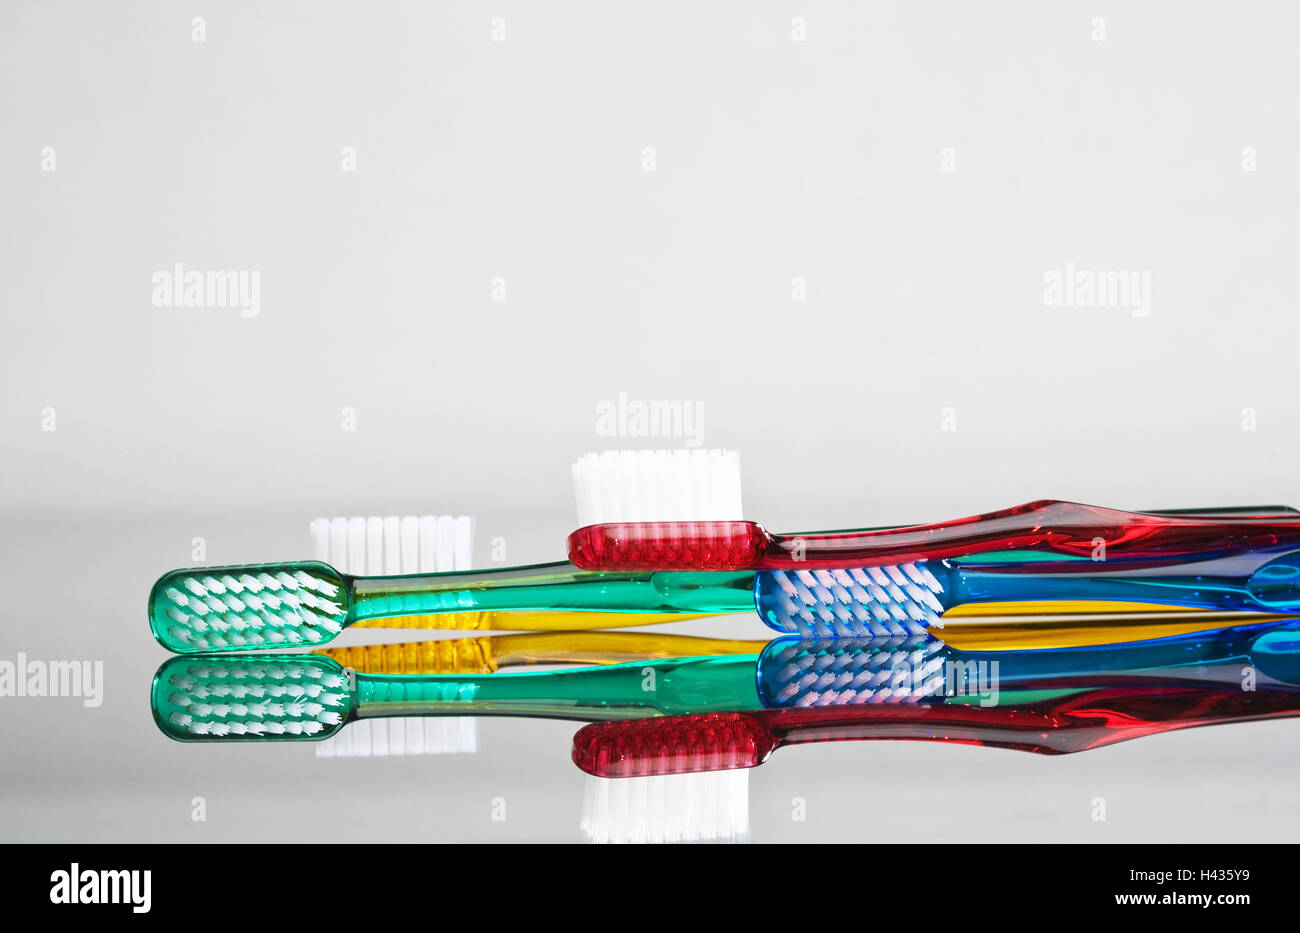 Toothbrushes, many, brightly, detail, Stock Photo